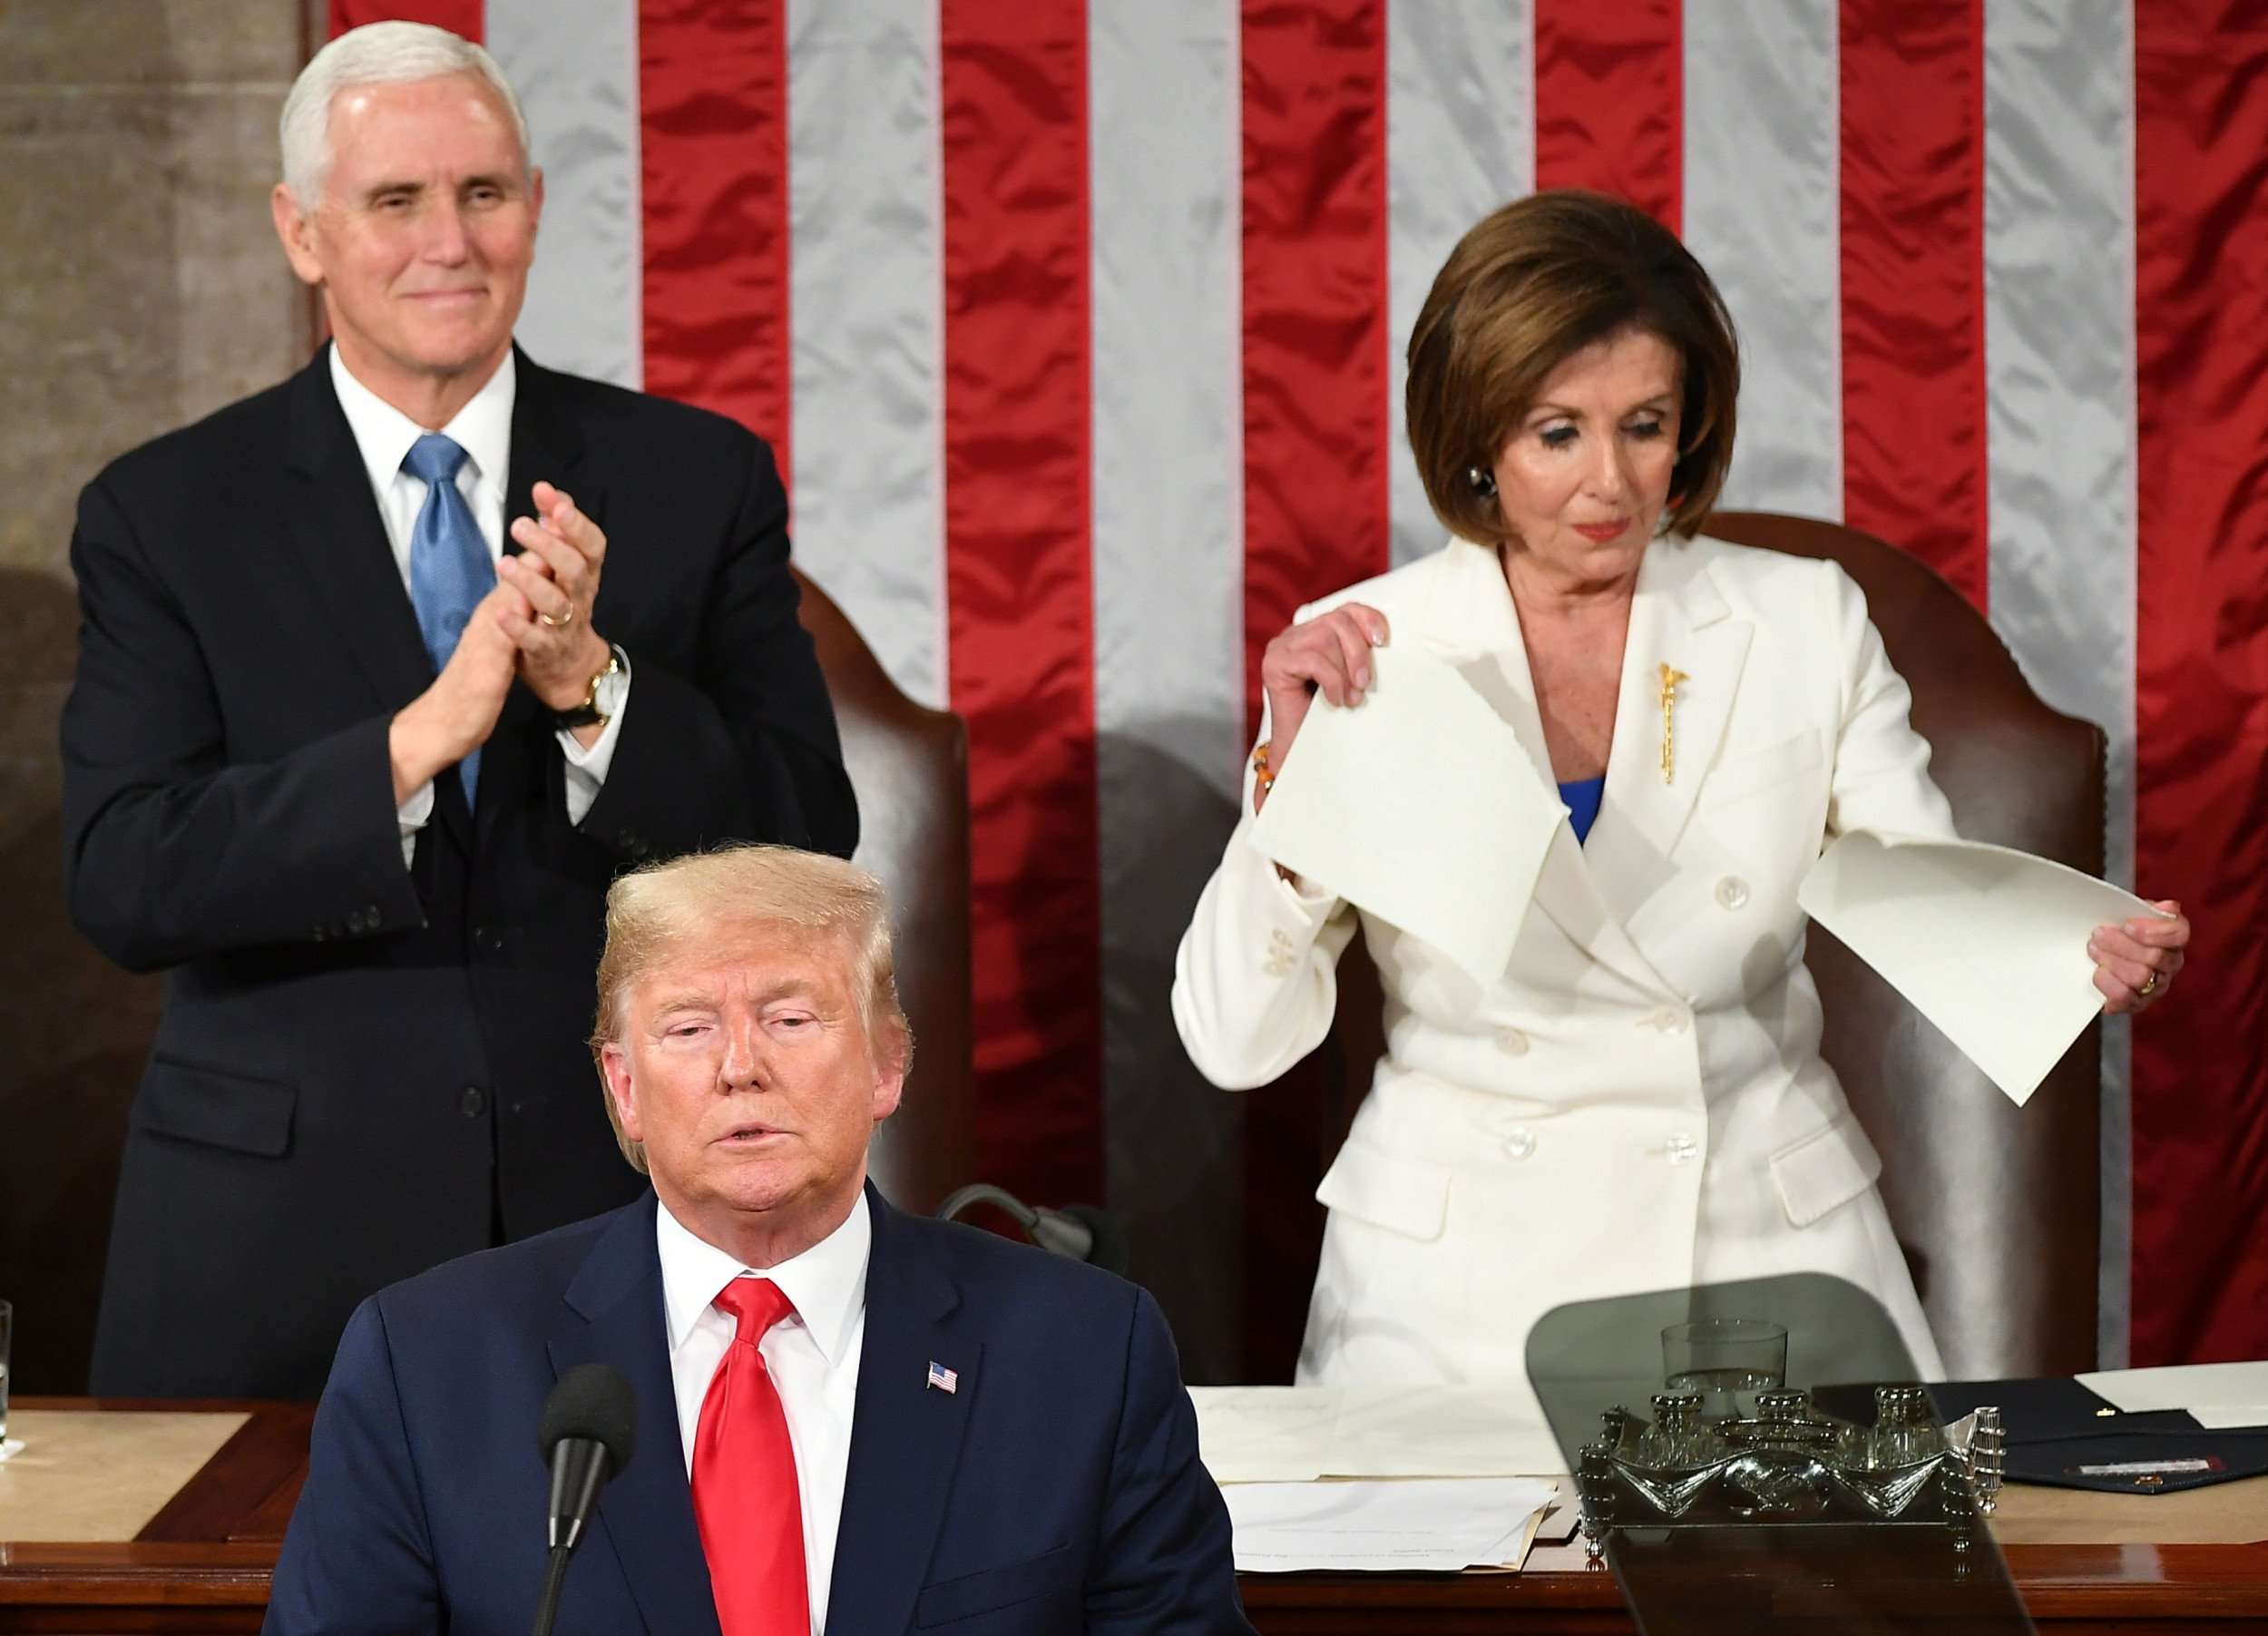 image for Pelosi Says She Tore Up Trump's 'Manifesto of Mistruths' as Dems Label His Speech a 'Right-Wing Reality Show'